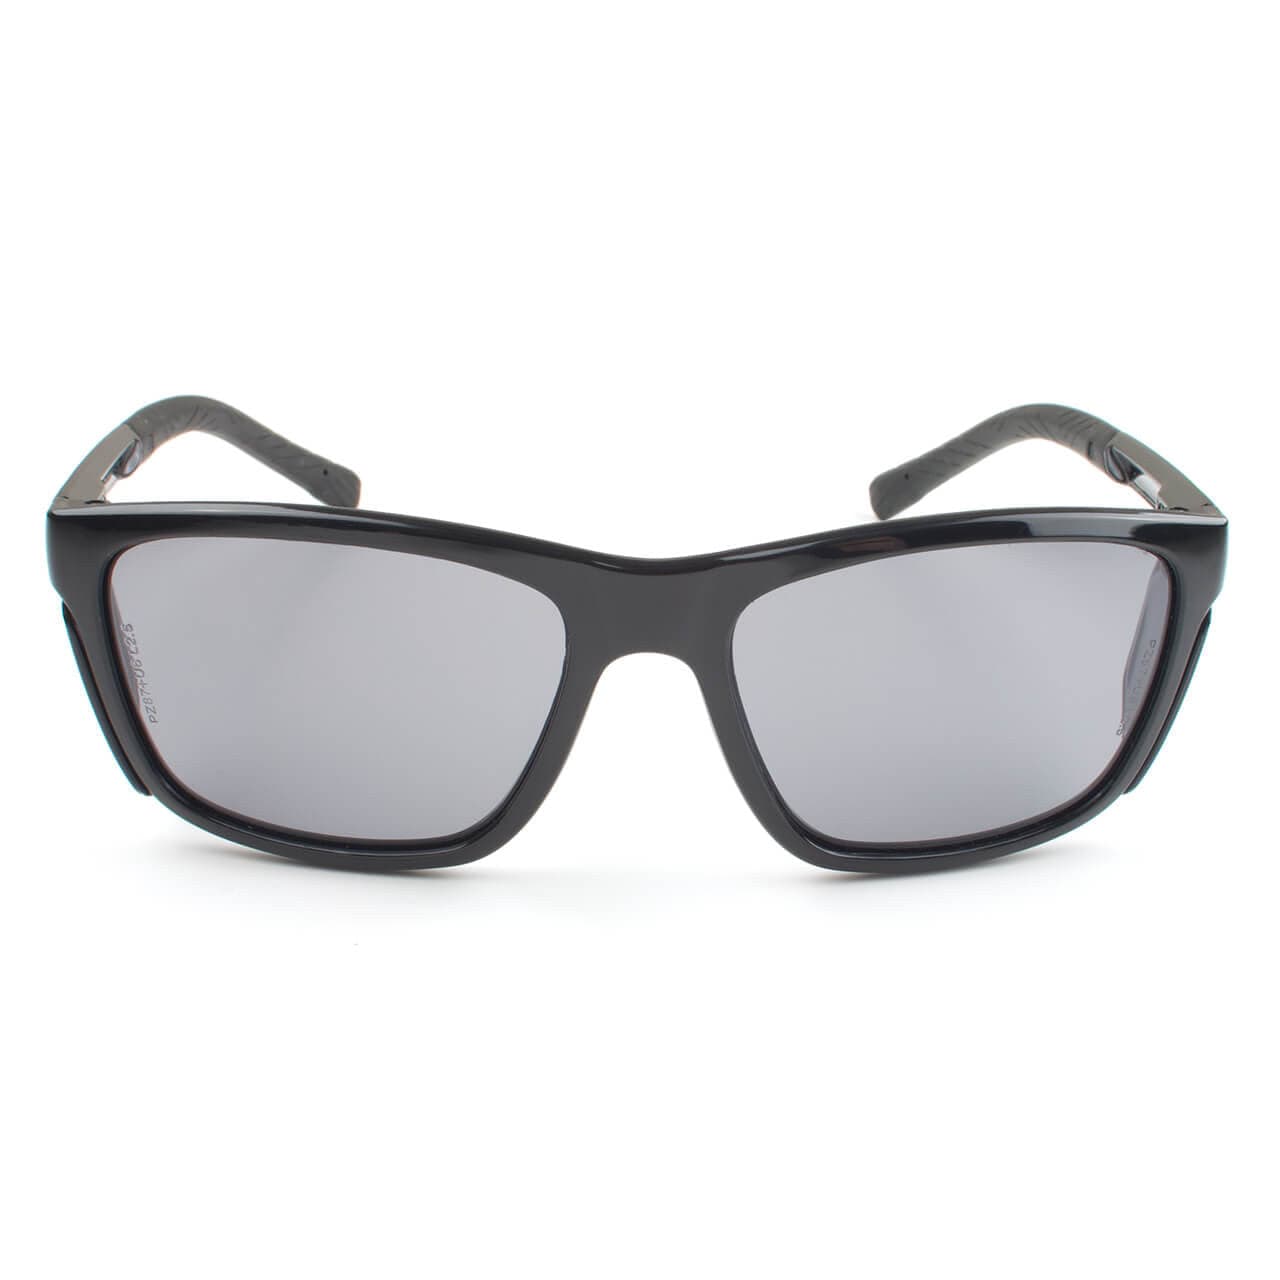 Metel M40 Safety Glasses with Black Frame and Gray Lenses Front View